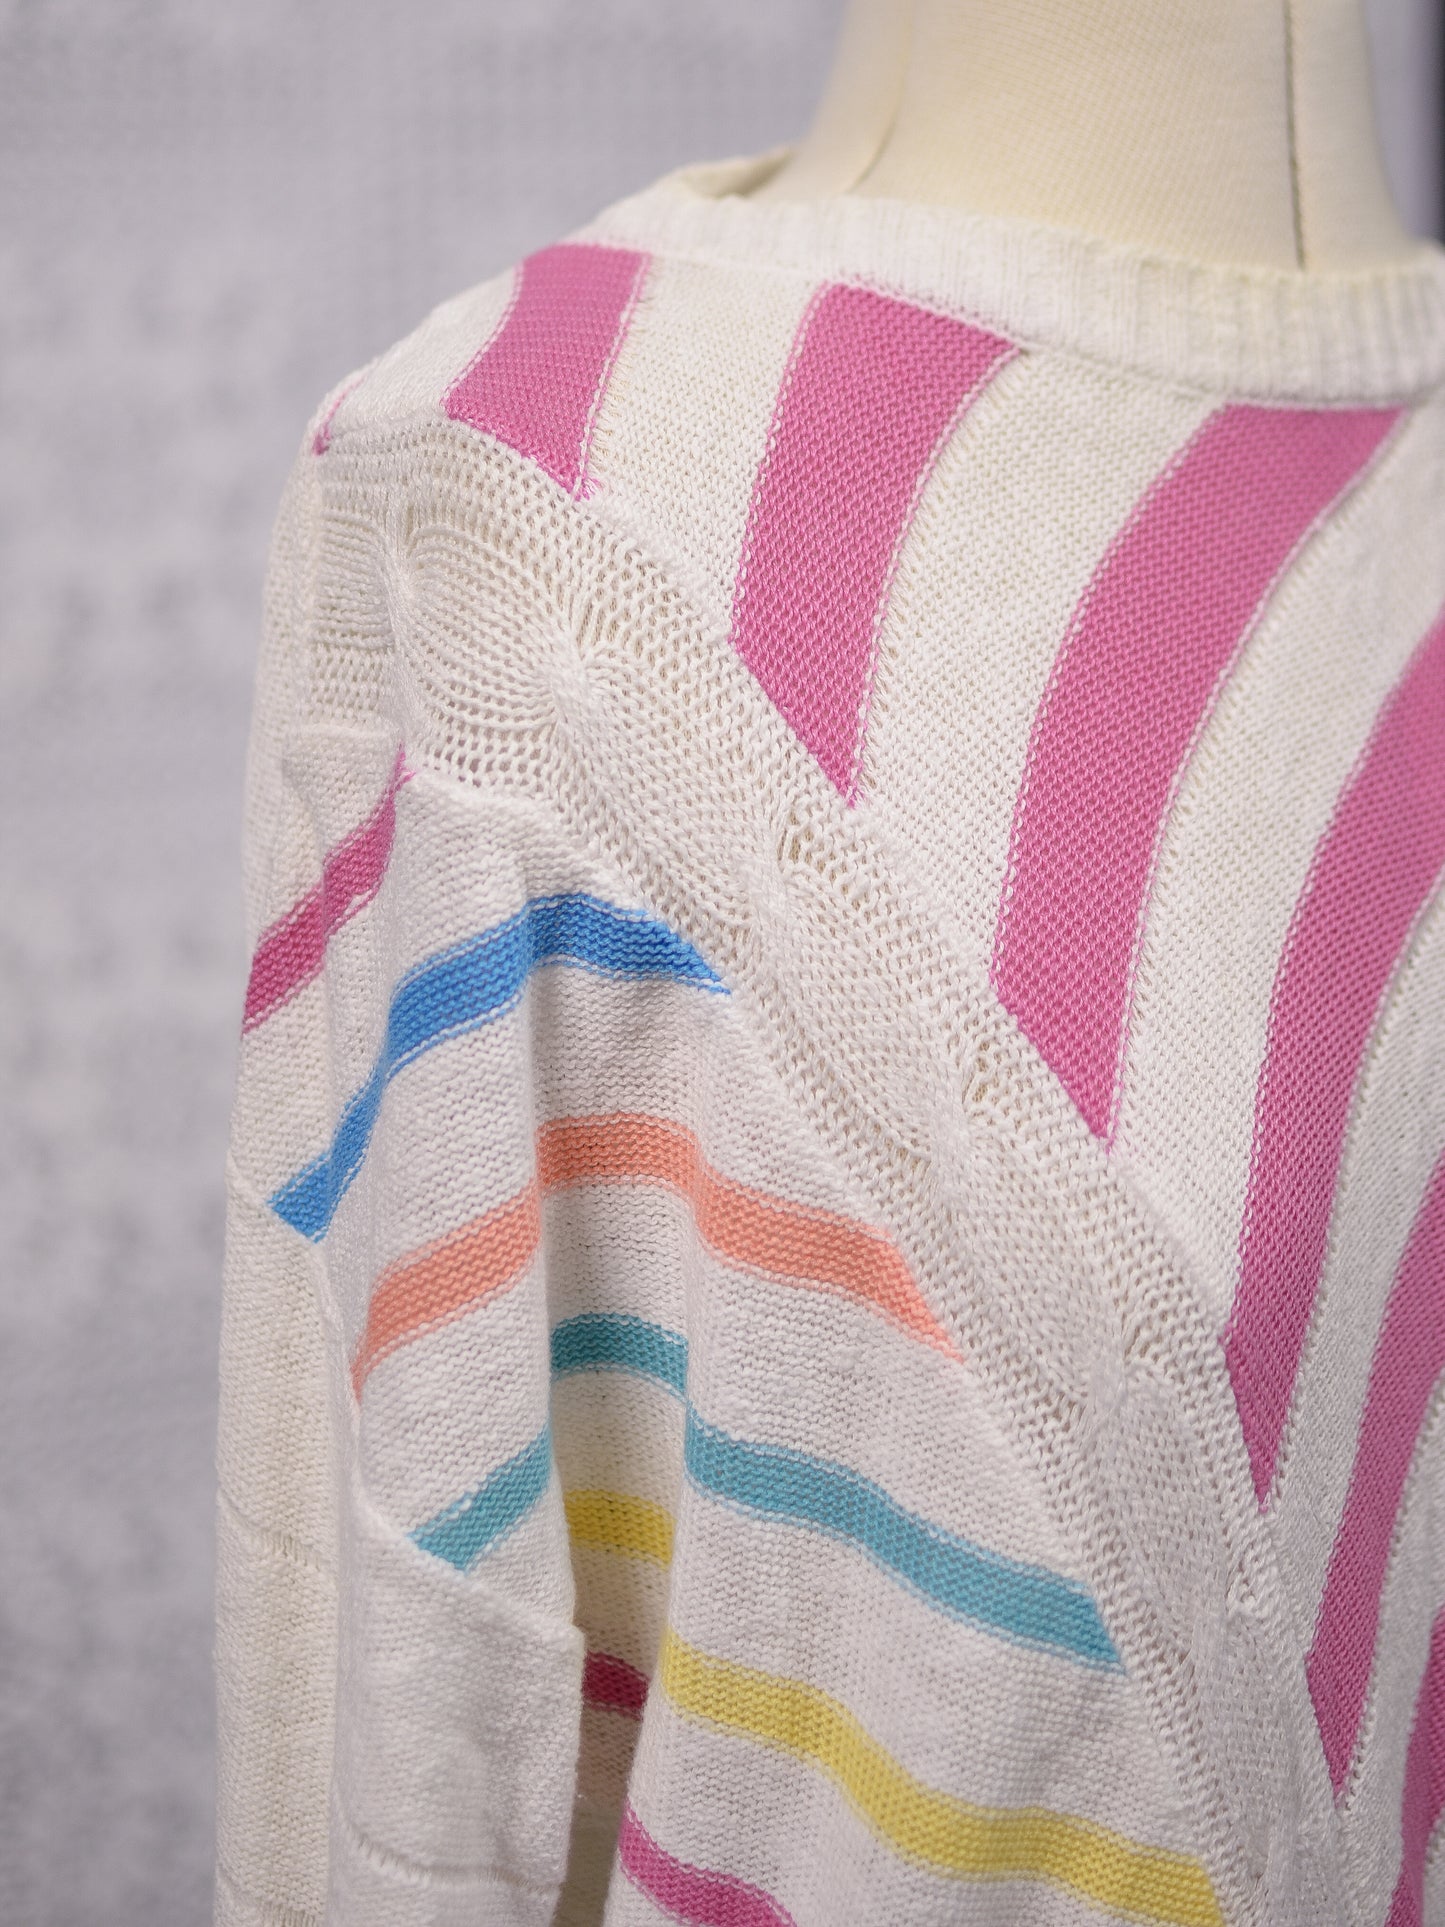 1980s Jaeger white, pink and rainbow diagonal stripe cotton jumper